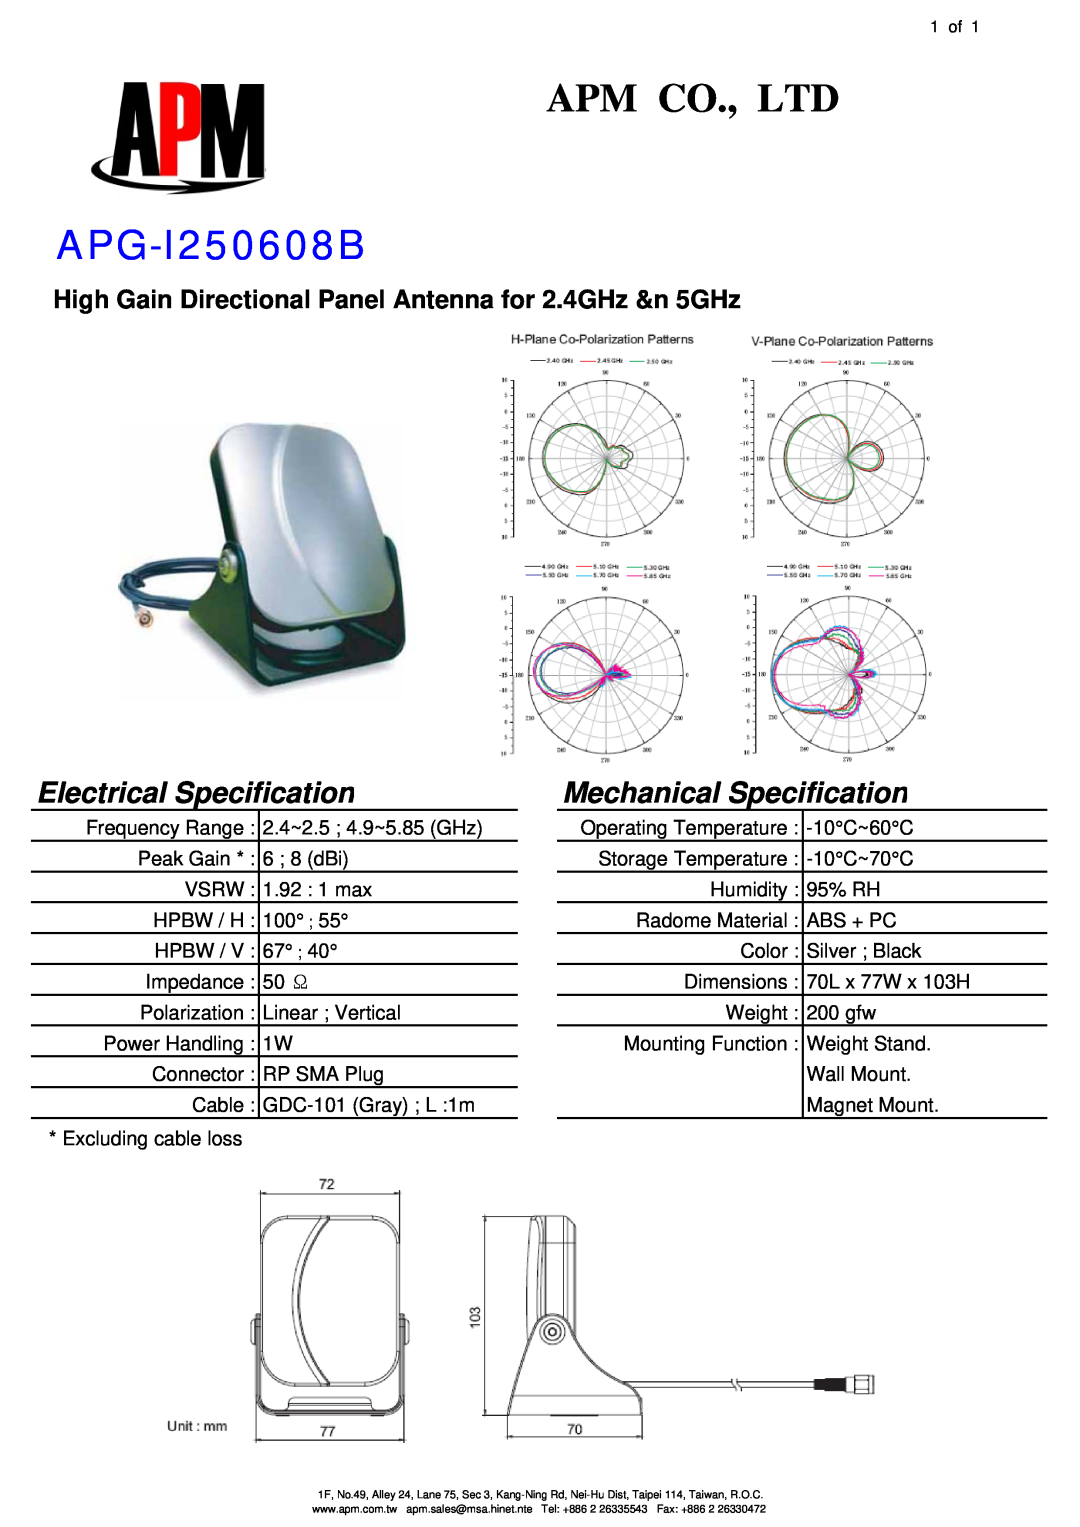 APM APG-I250608B dimensions Electrical Specification, Mechanical Specification 